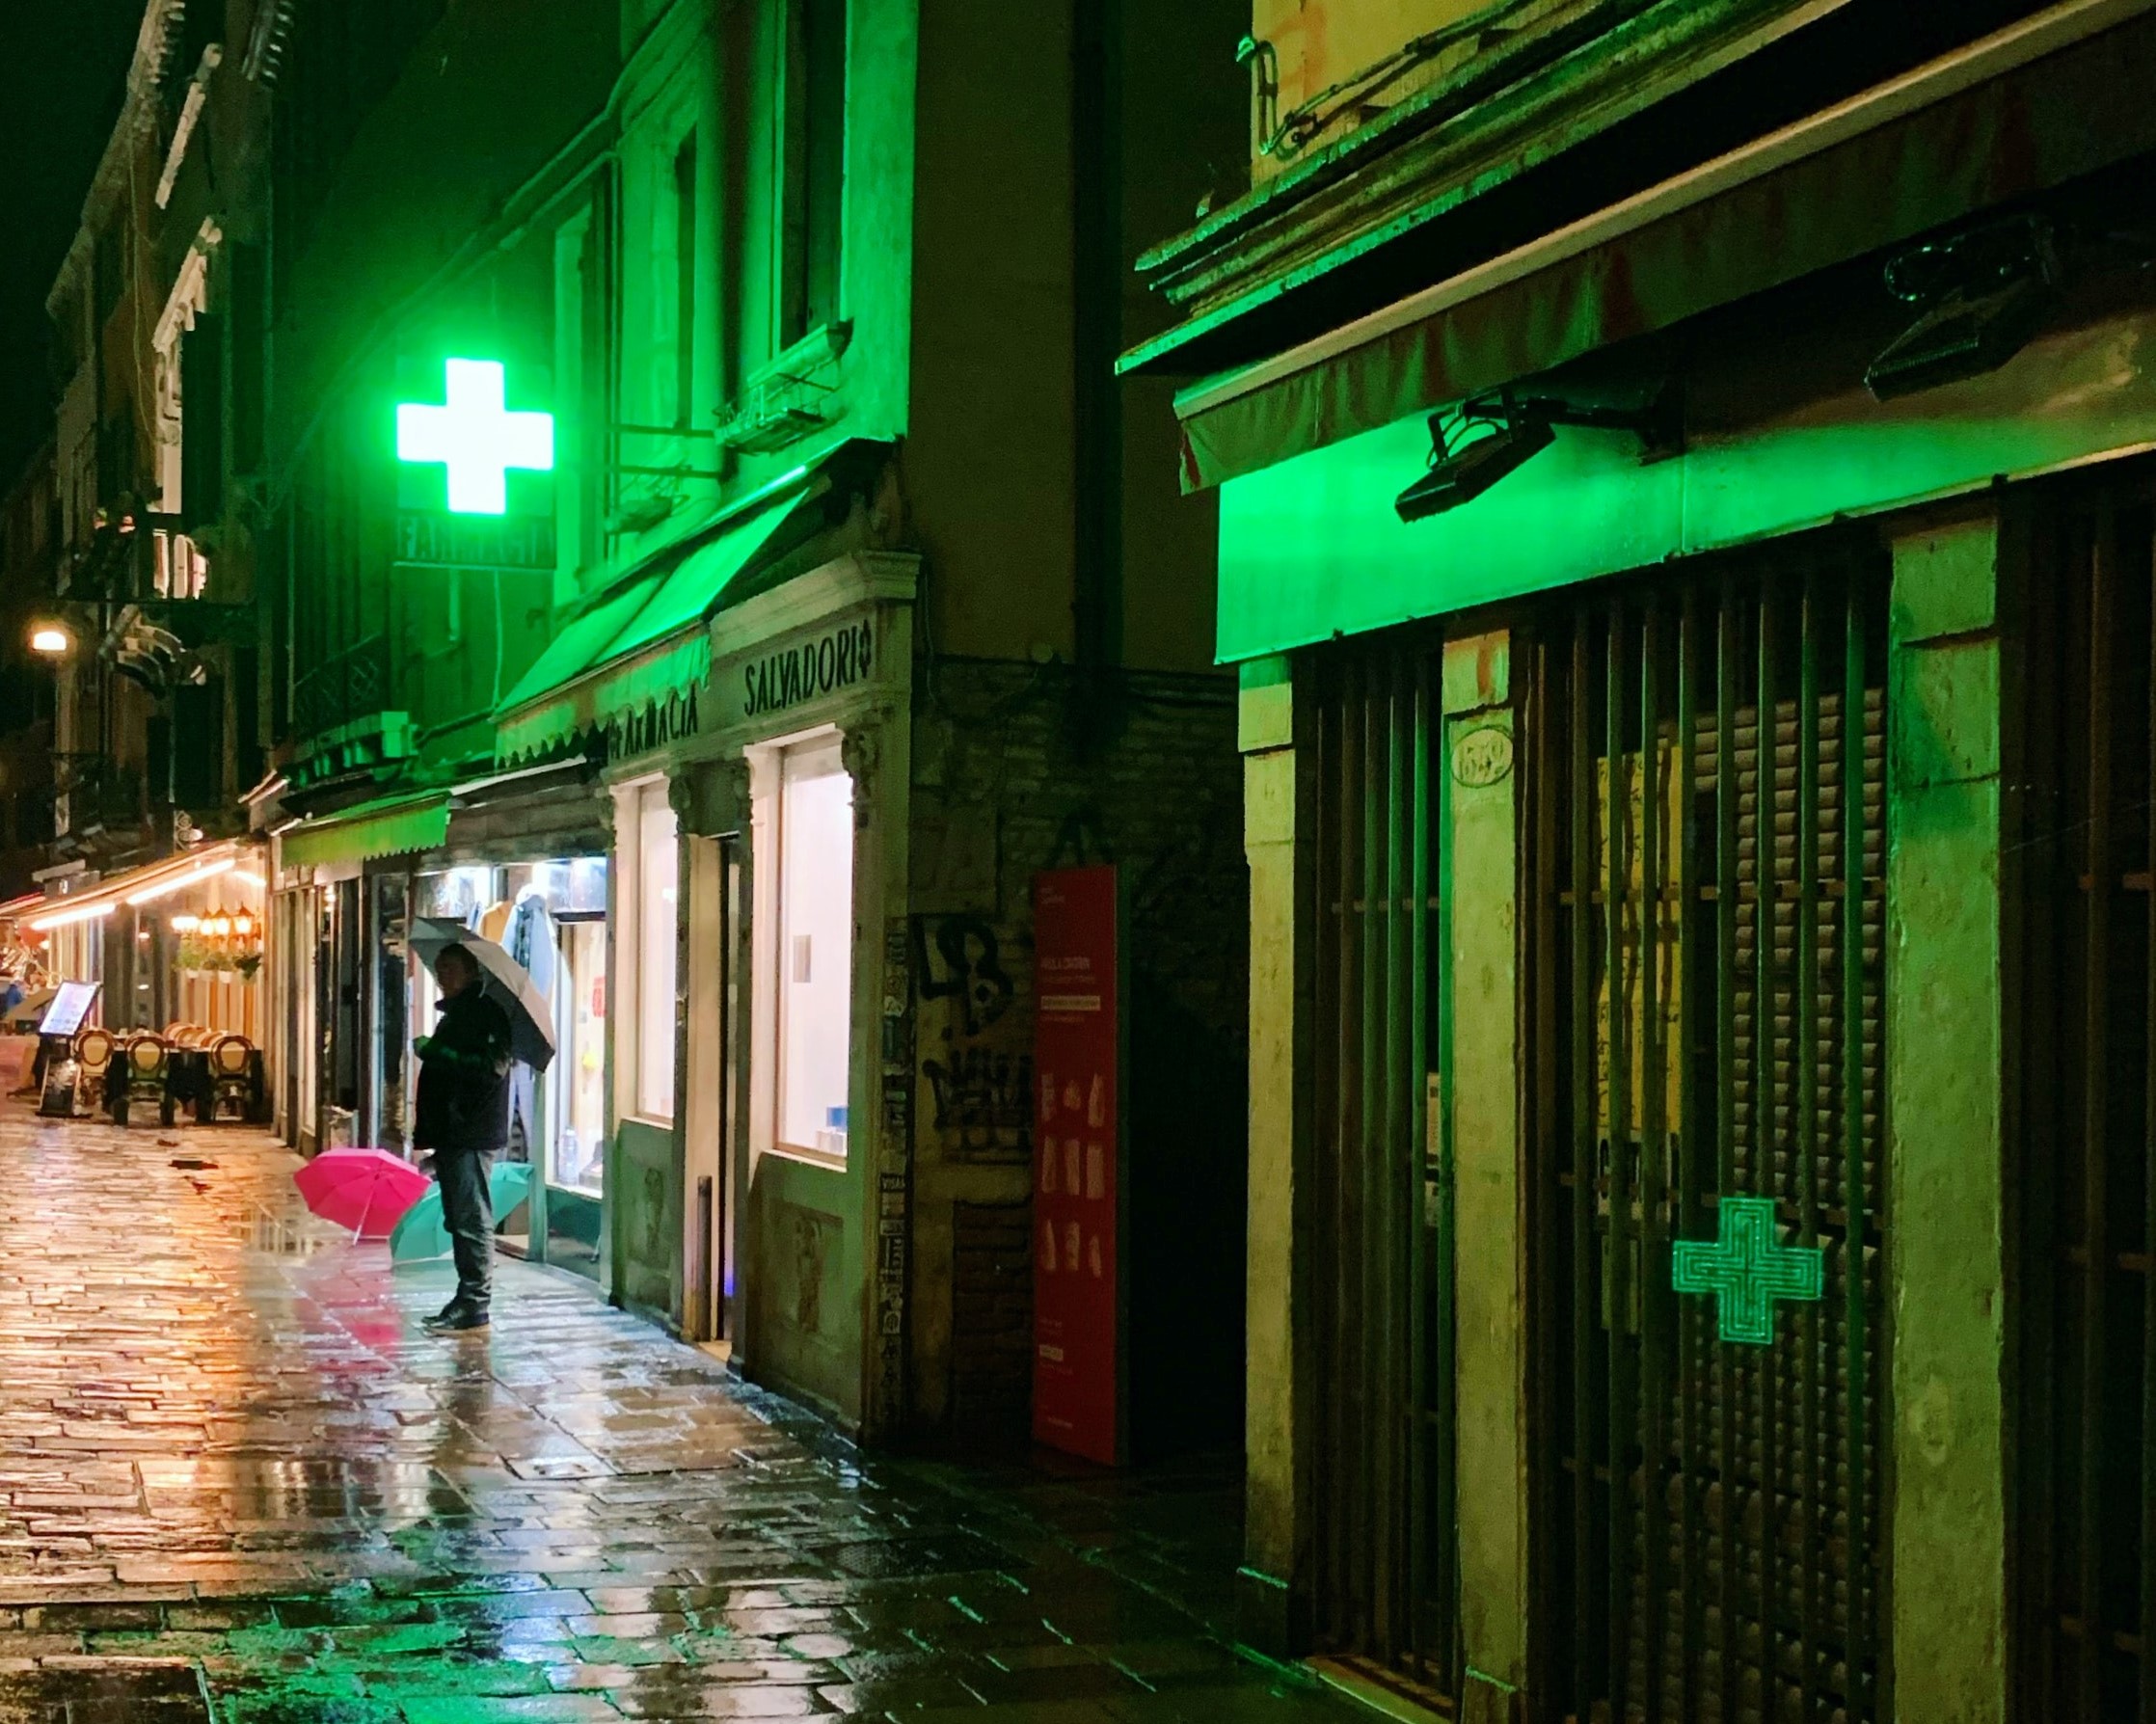 A pharmacy with a neon green cross sign on a rainy street at night